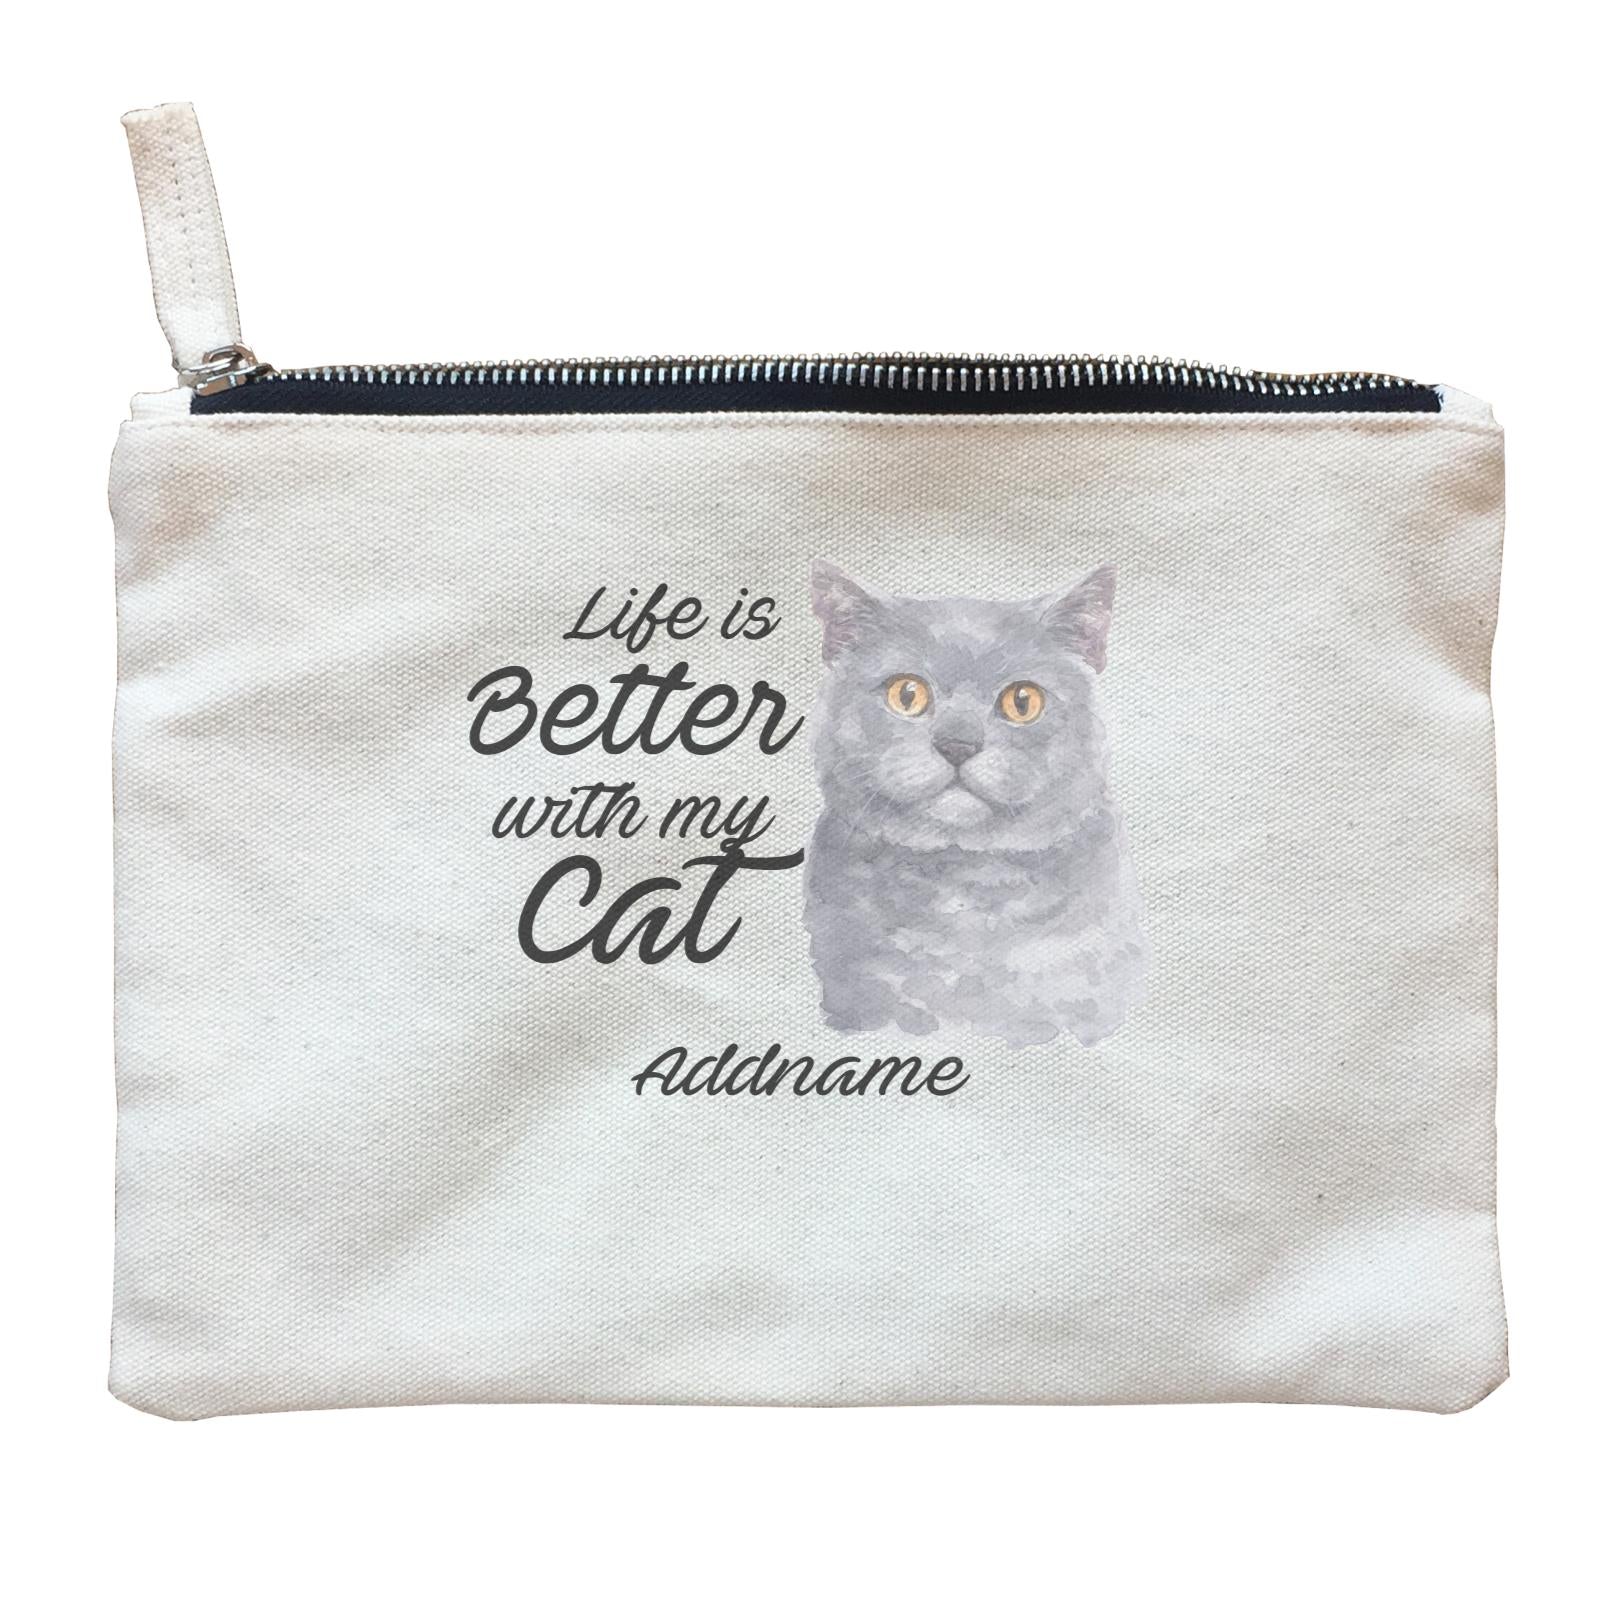 Watercolor Life is Better With My Cat British Shorthair Grey Addname Zipper Pouch